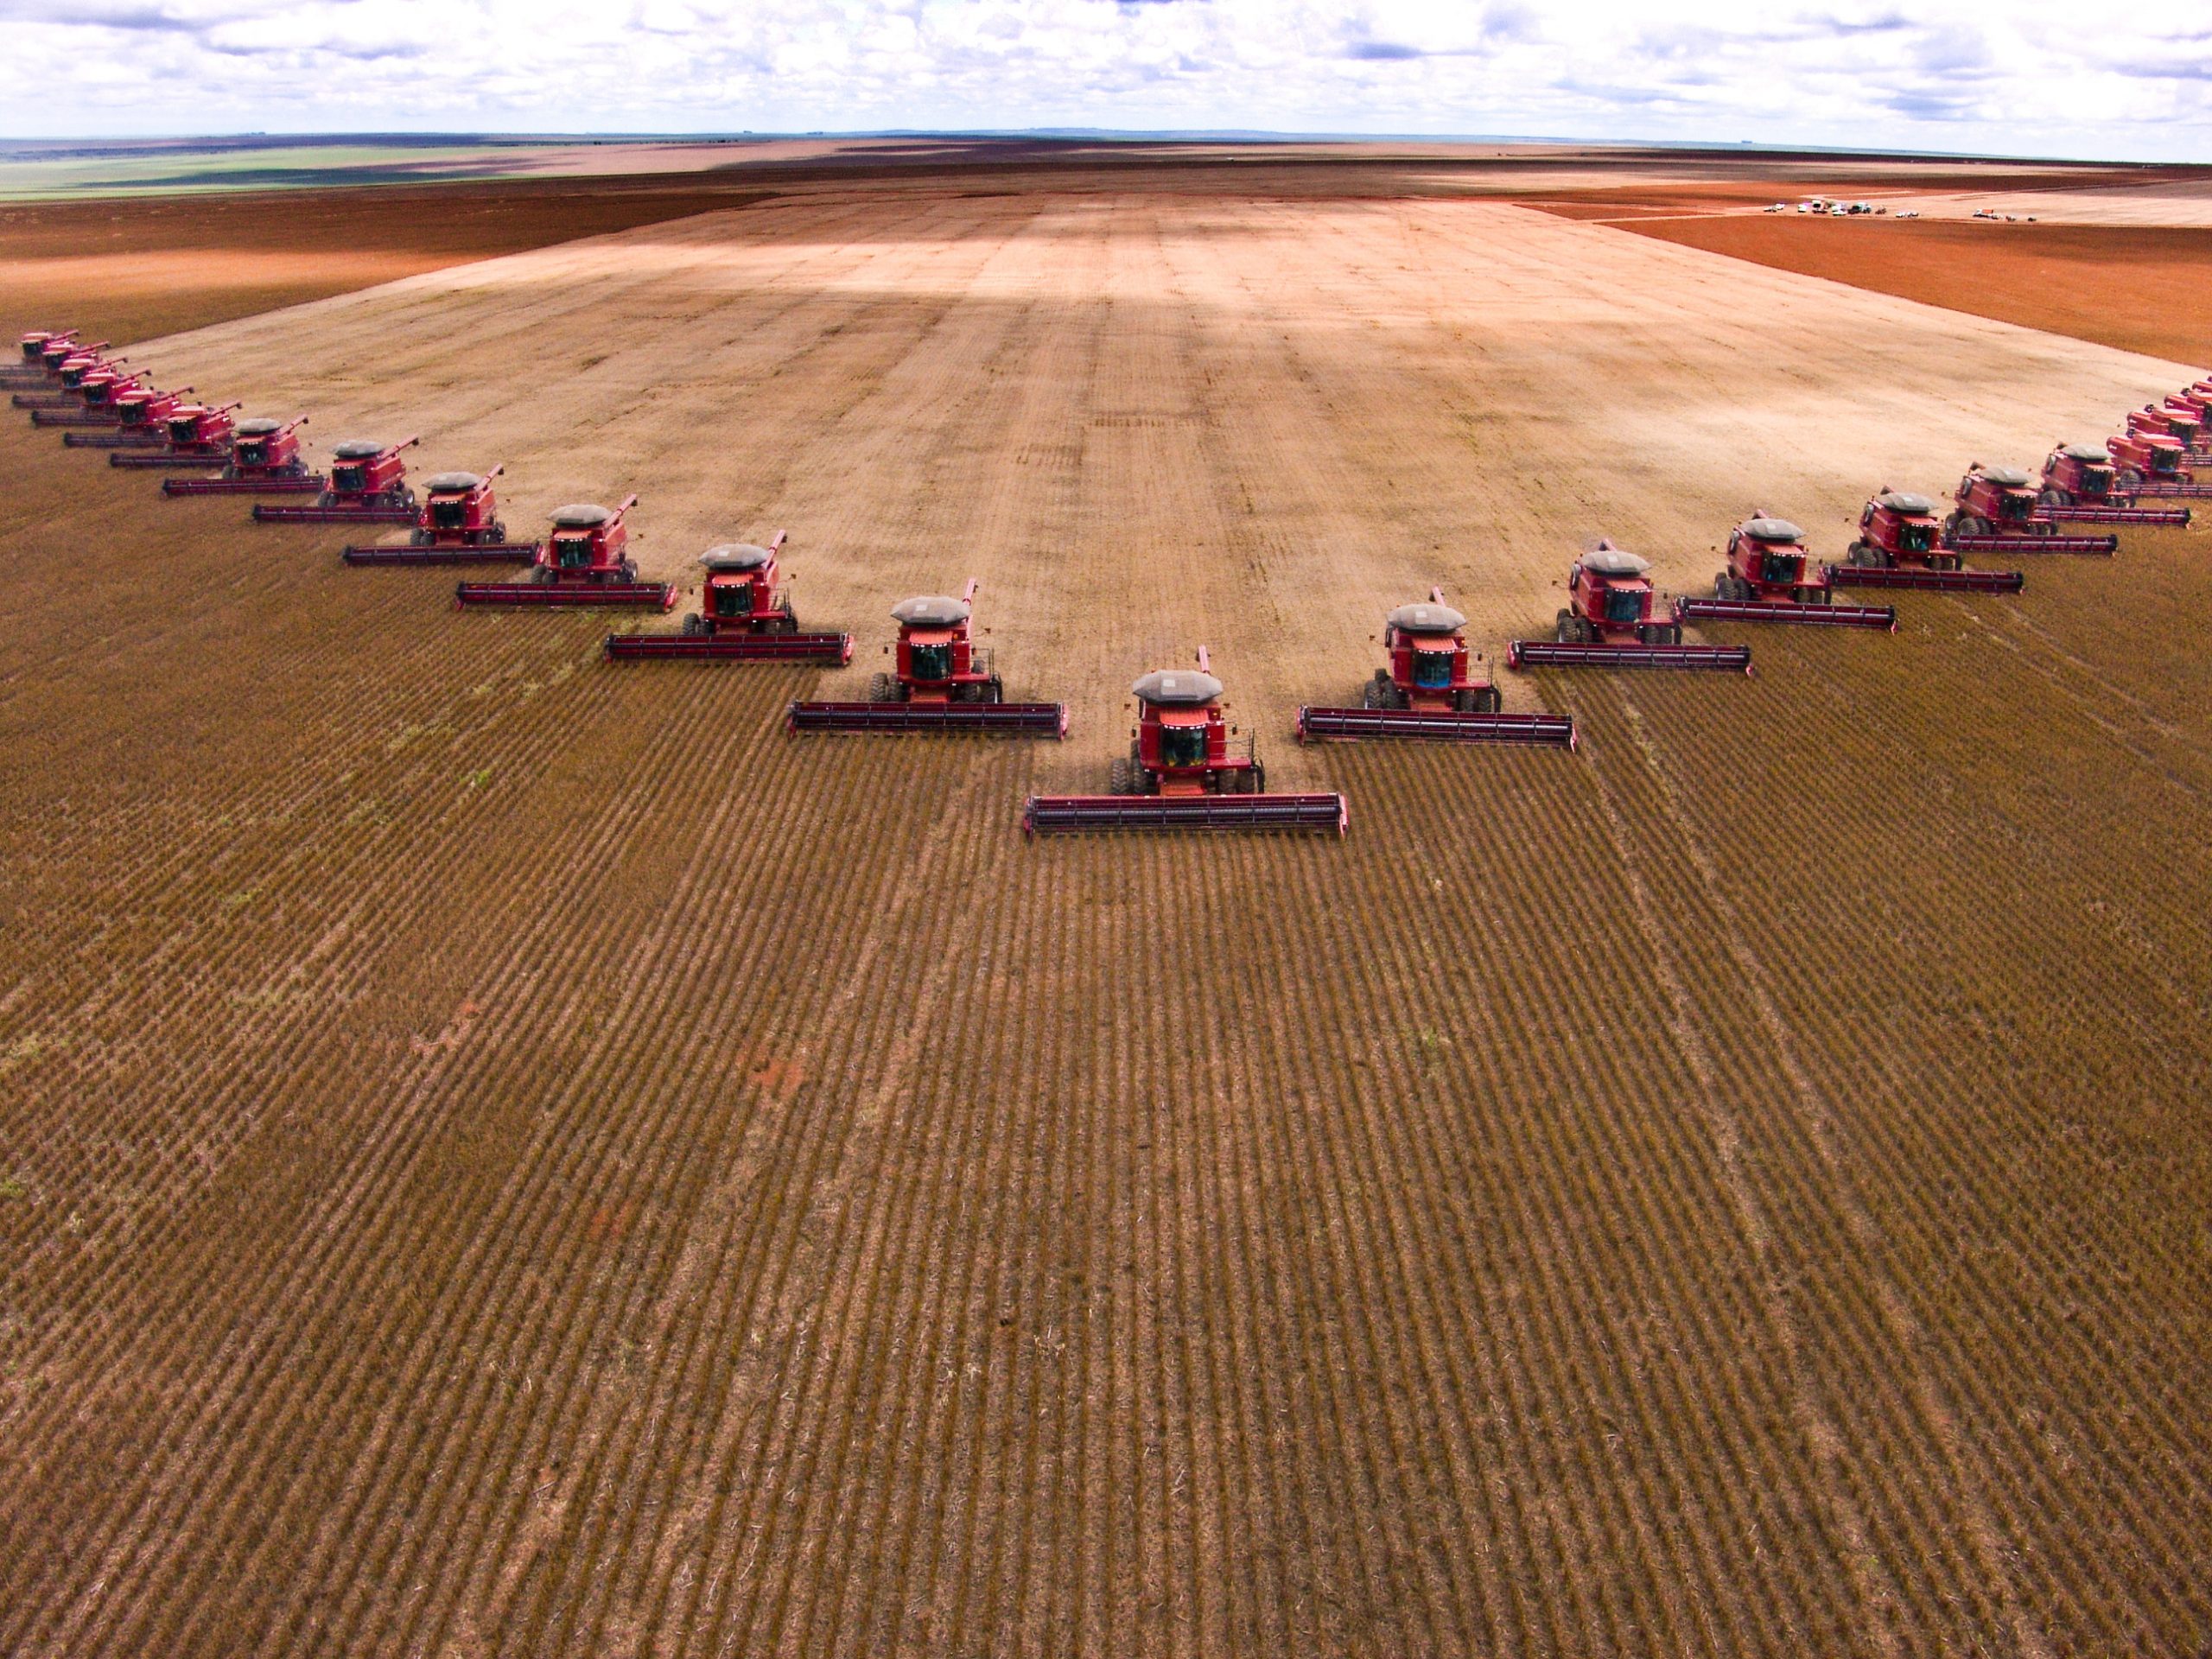 Successful crop model in Brazil to feed the world